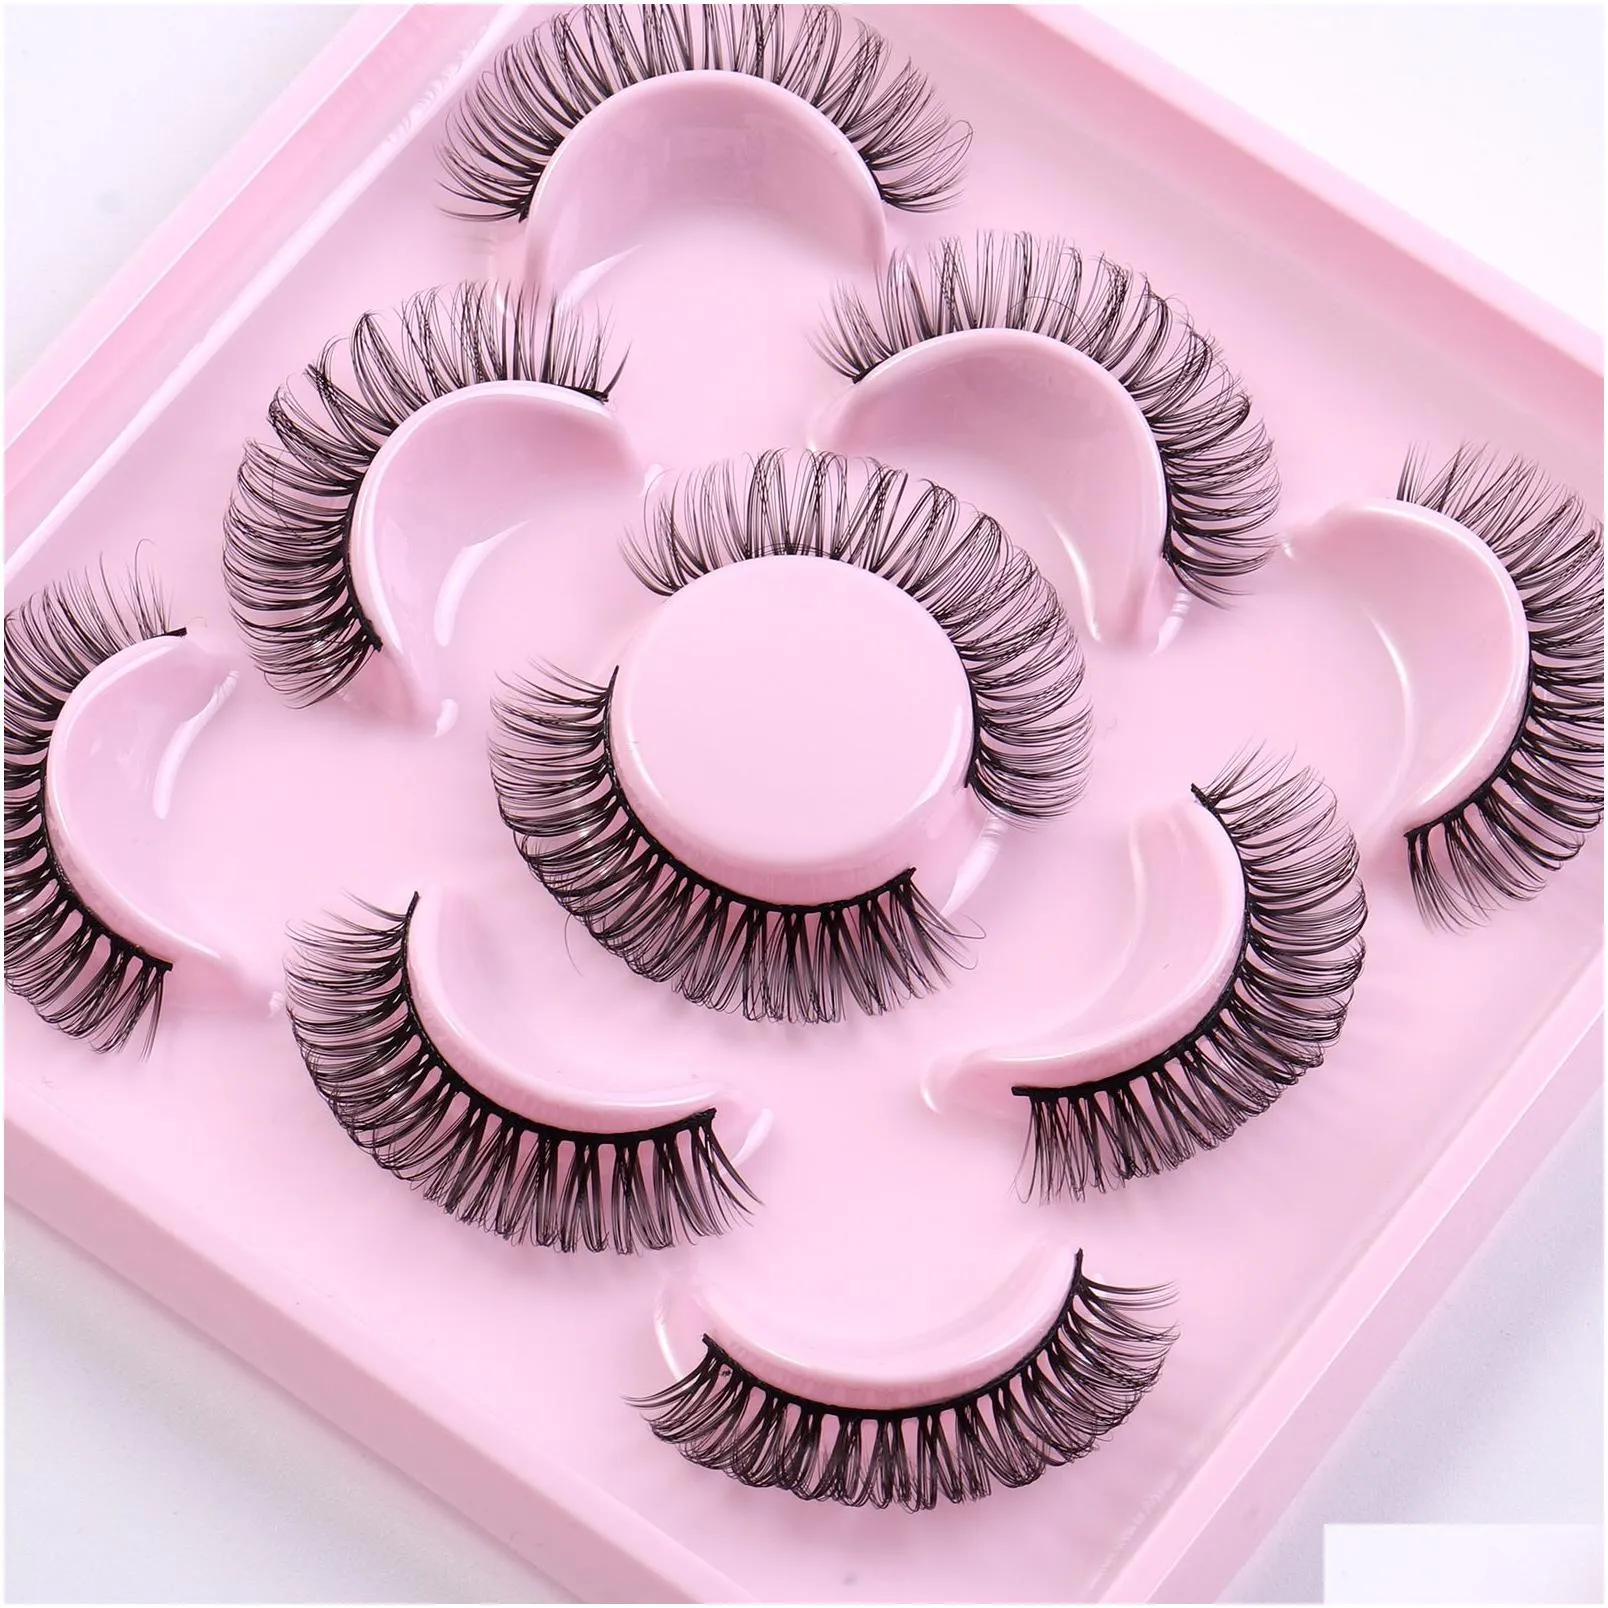 thick curled false eyelashes extensions naturally soft light handmade reusable multilayer 3d mink fake lashes fluffy strip lash